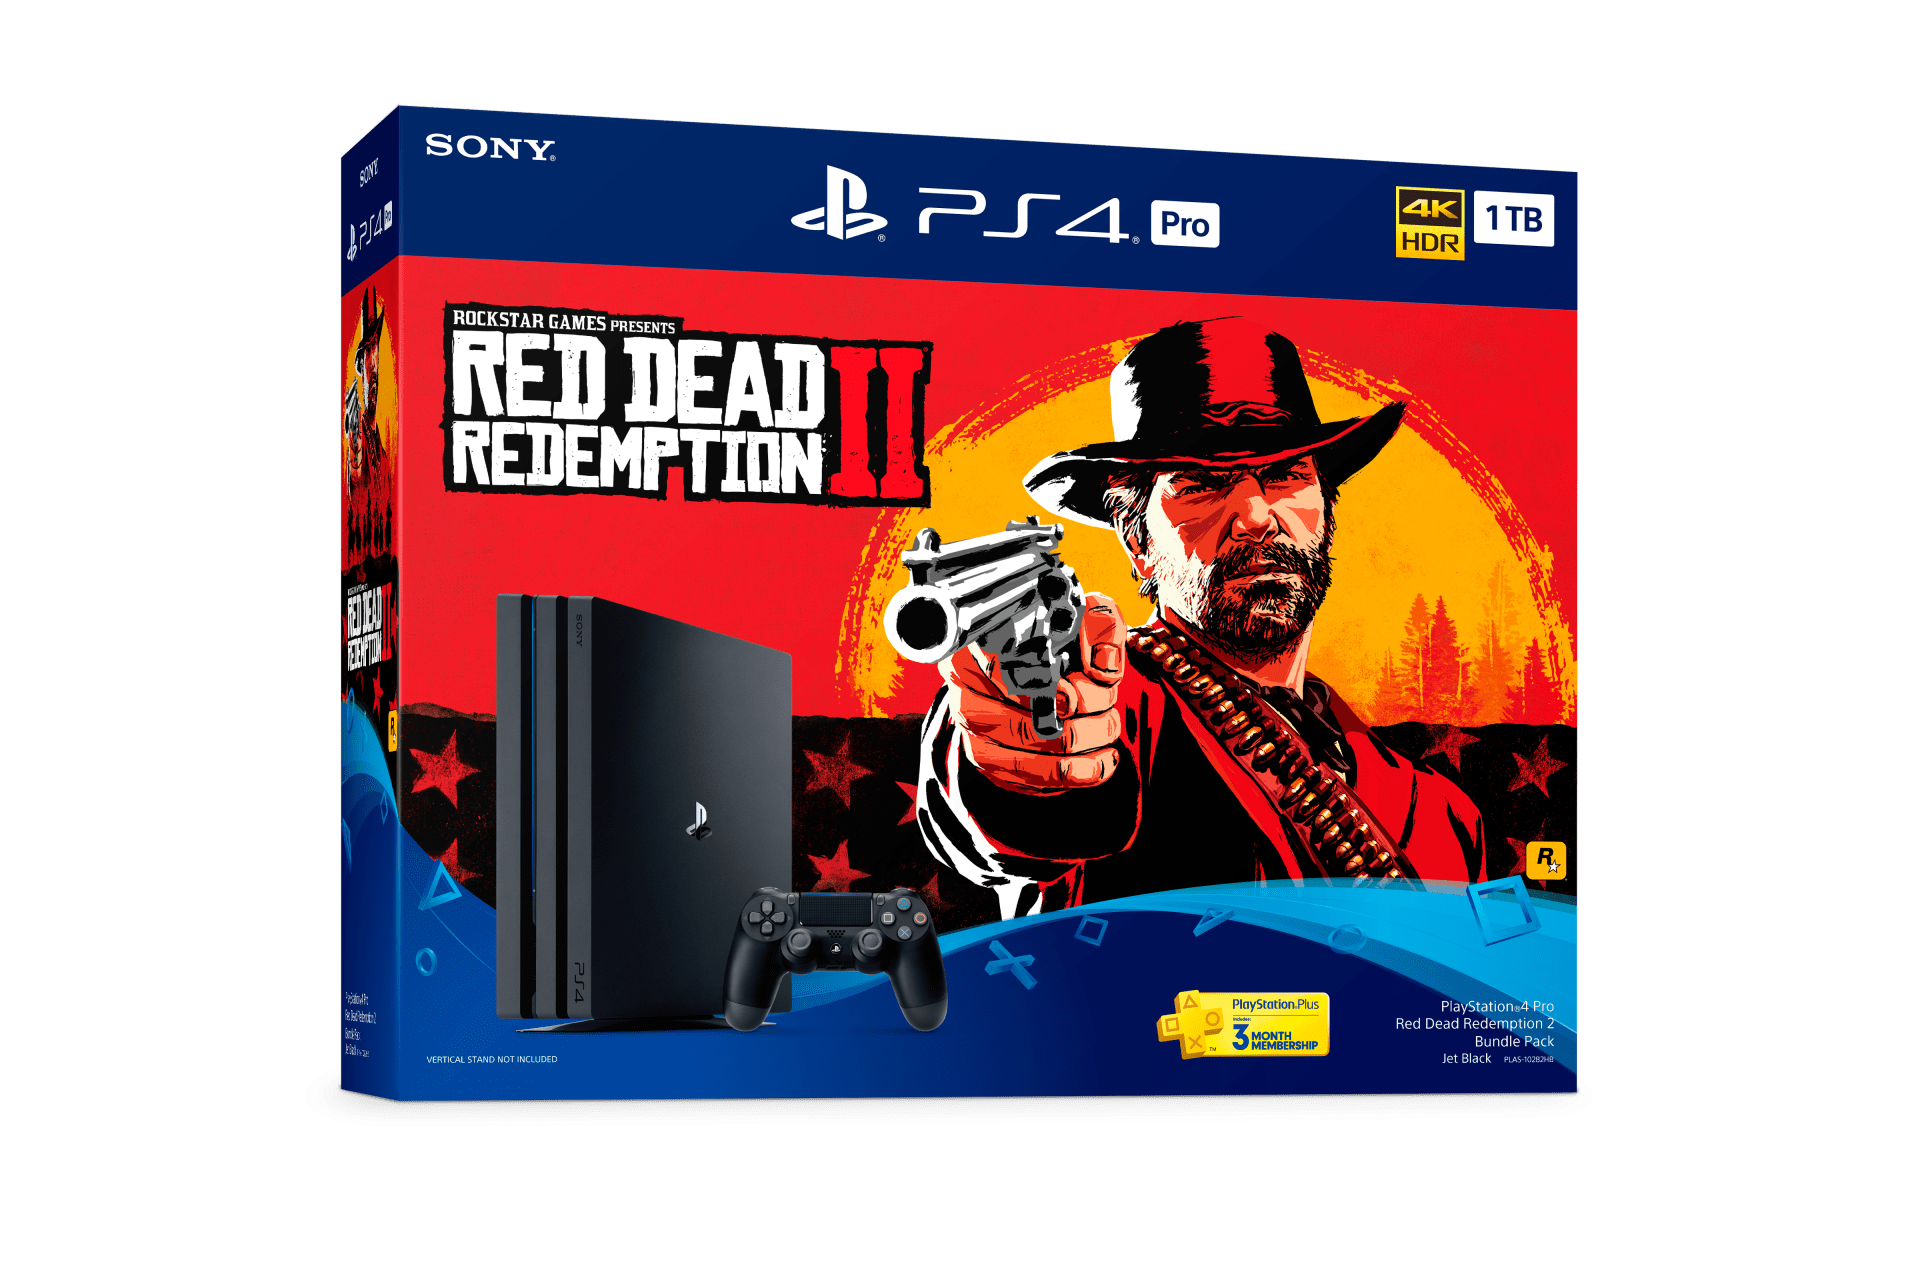 Red redemption 1 ps4. Sony PLAYSTATION 4 Pro 1tb rdr2. Ред дед редемпшн на ps4. Sony PLAYSTATION 4 Slim Red Dead Redemption 2. Red Dead Redemption 2 PLAYSTATION.